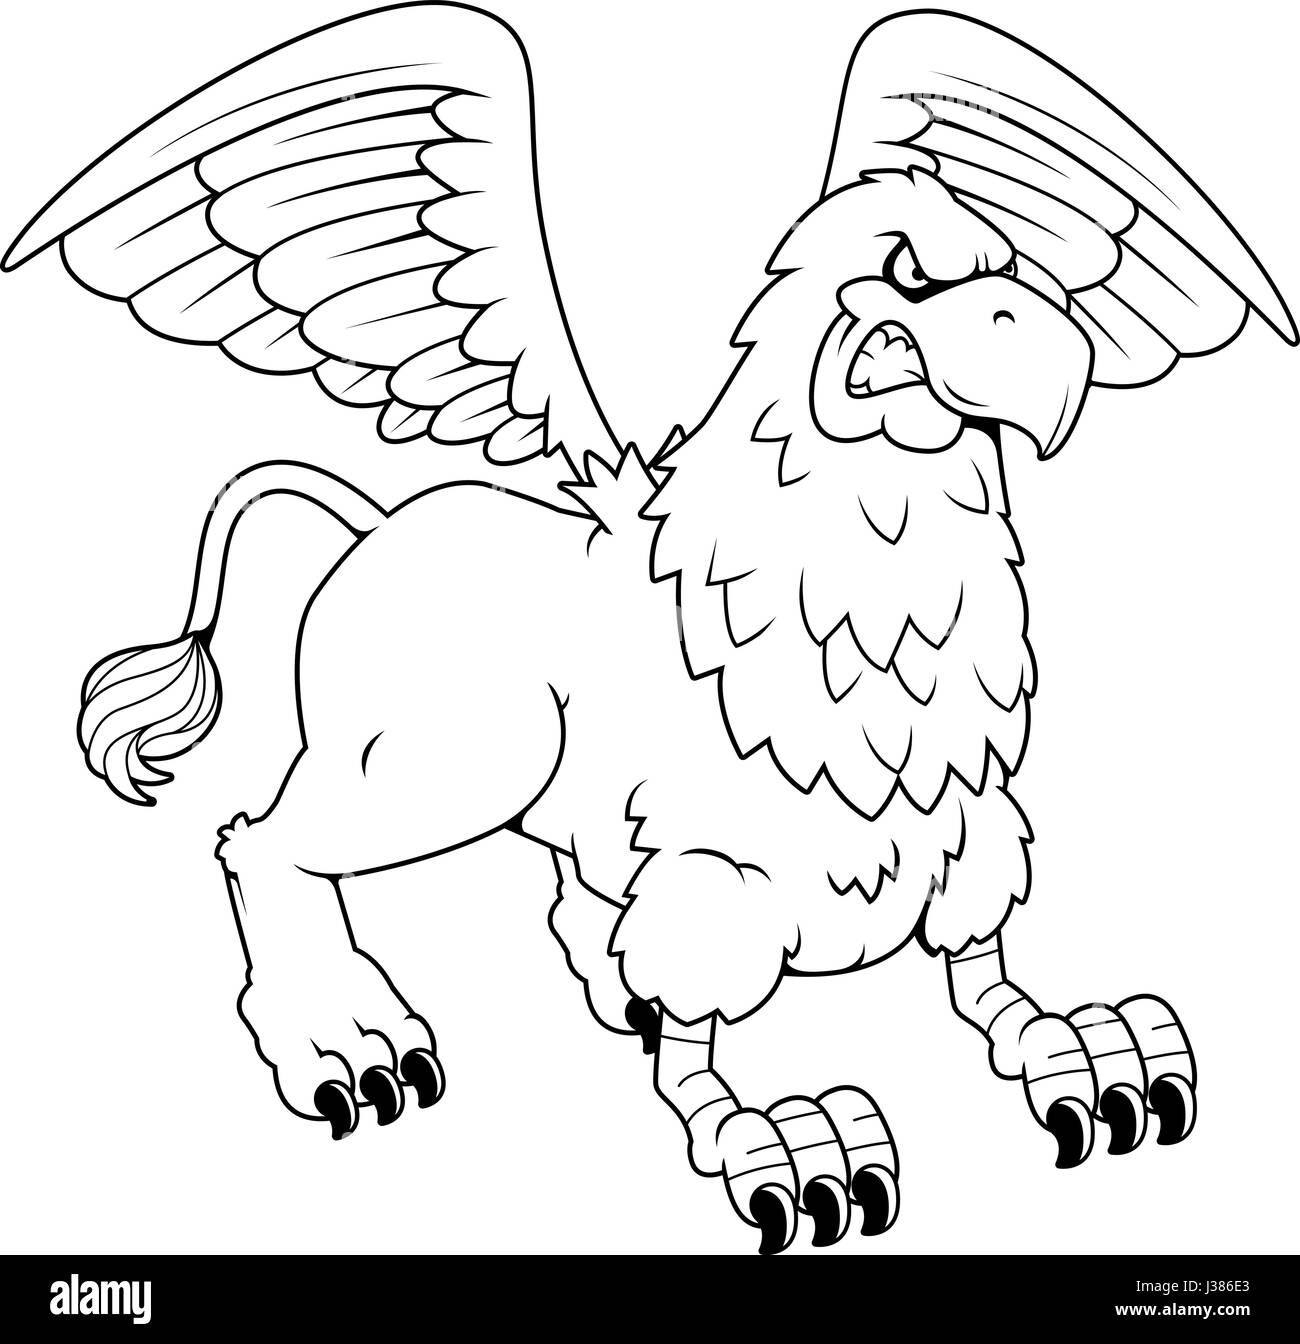 A cartoon illustration of a griffin looking angry. Stock Vector